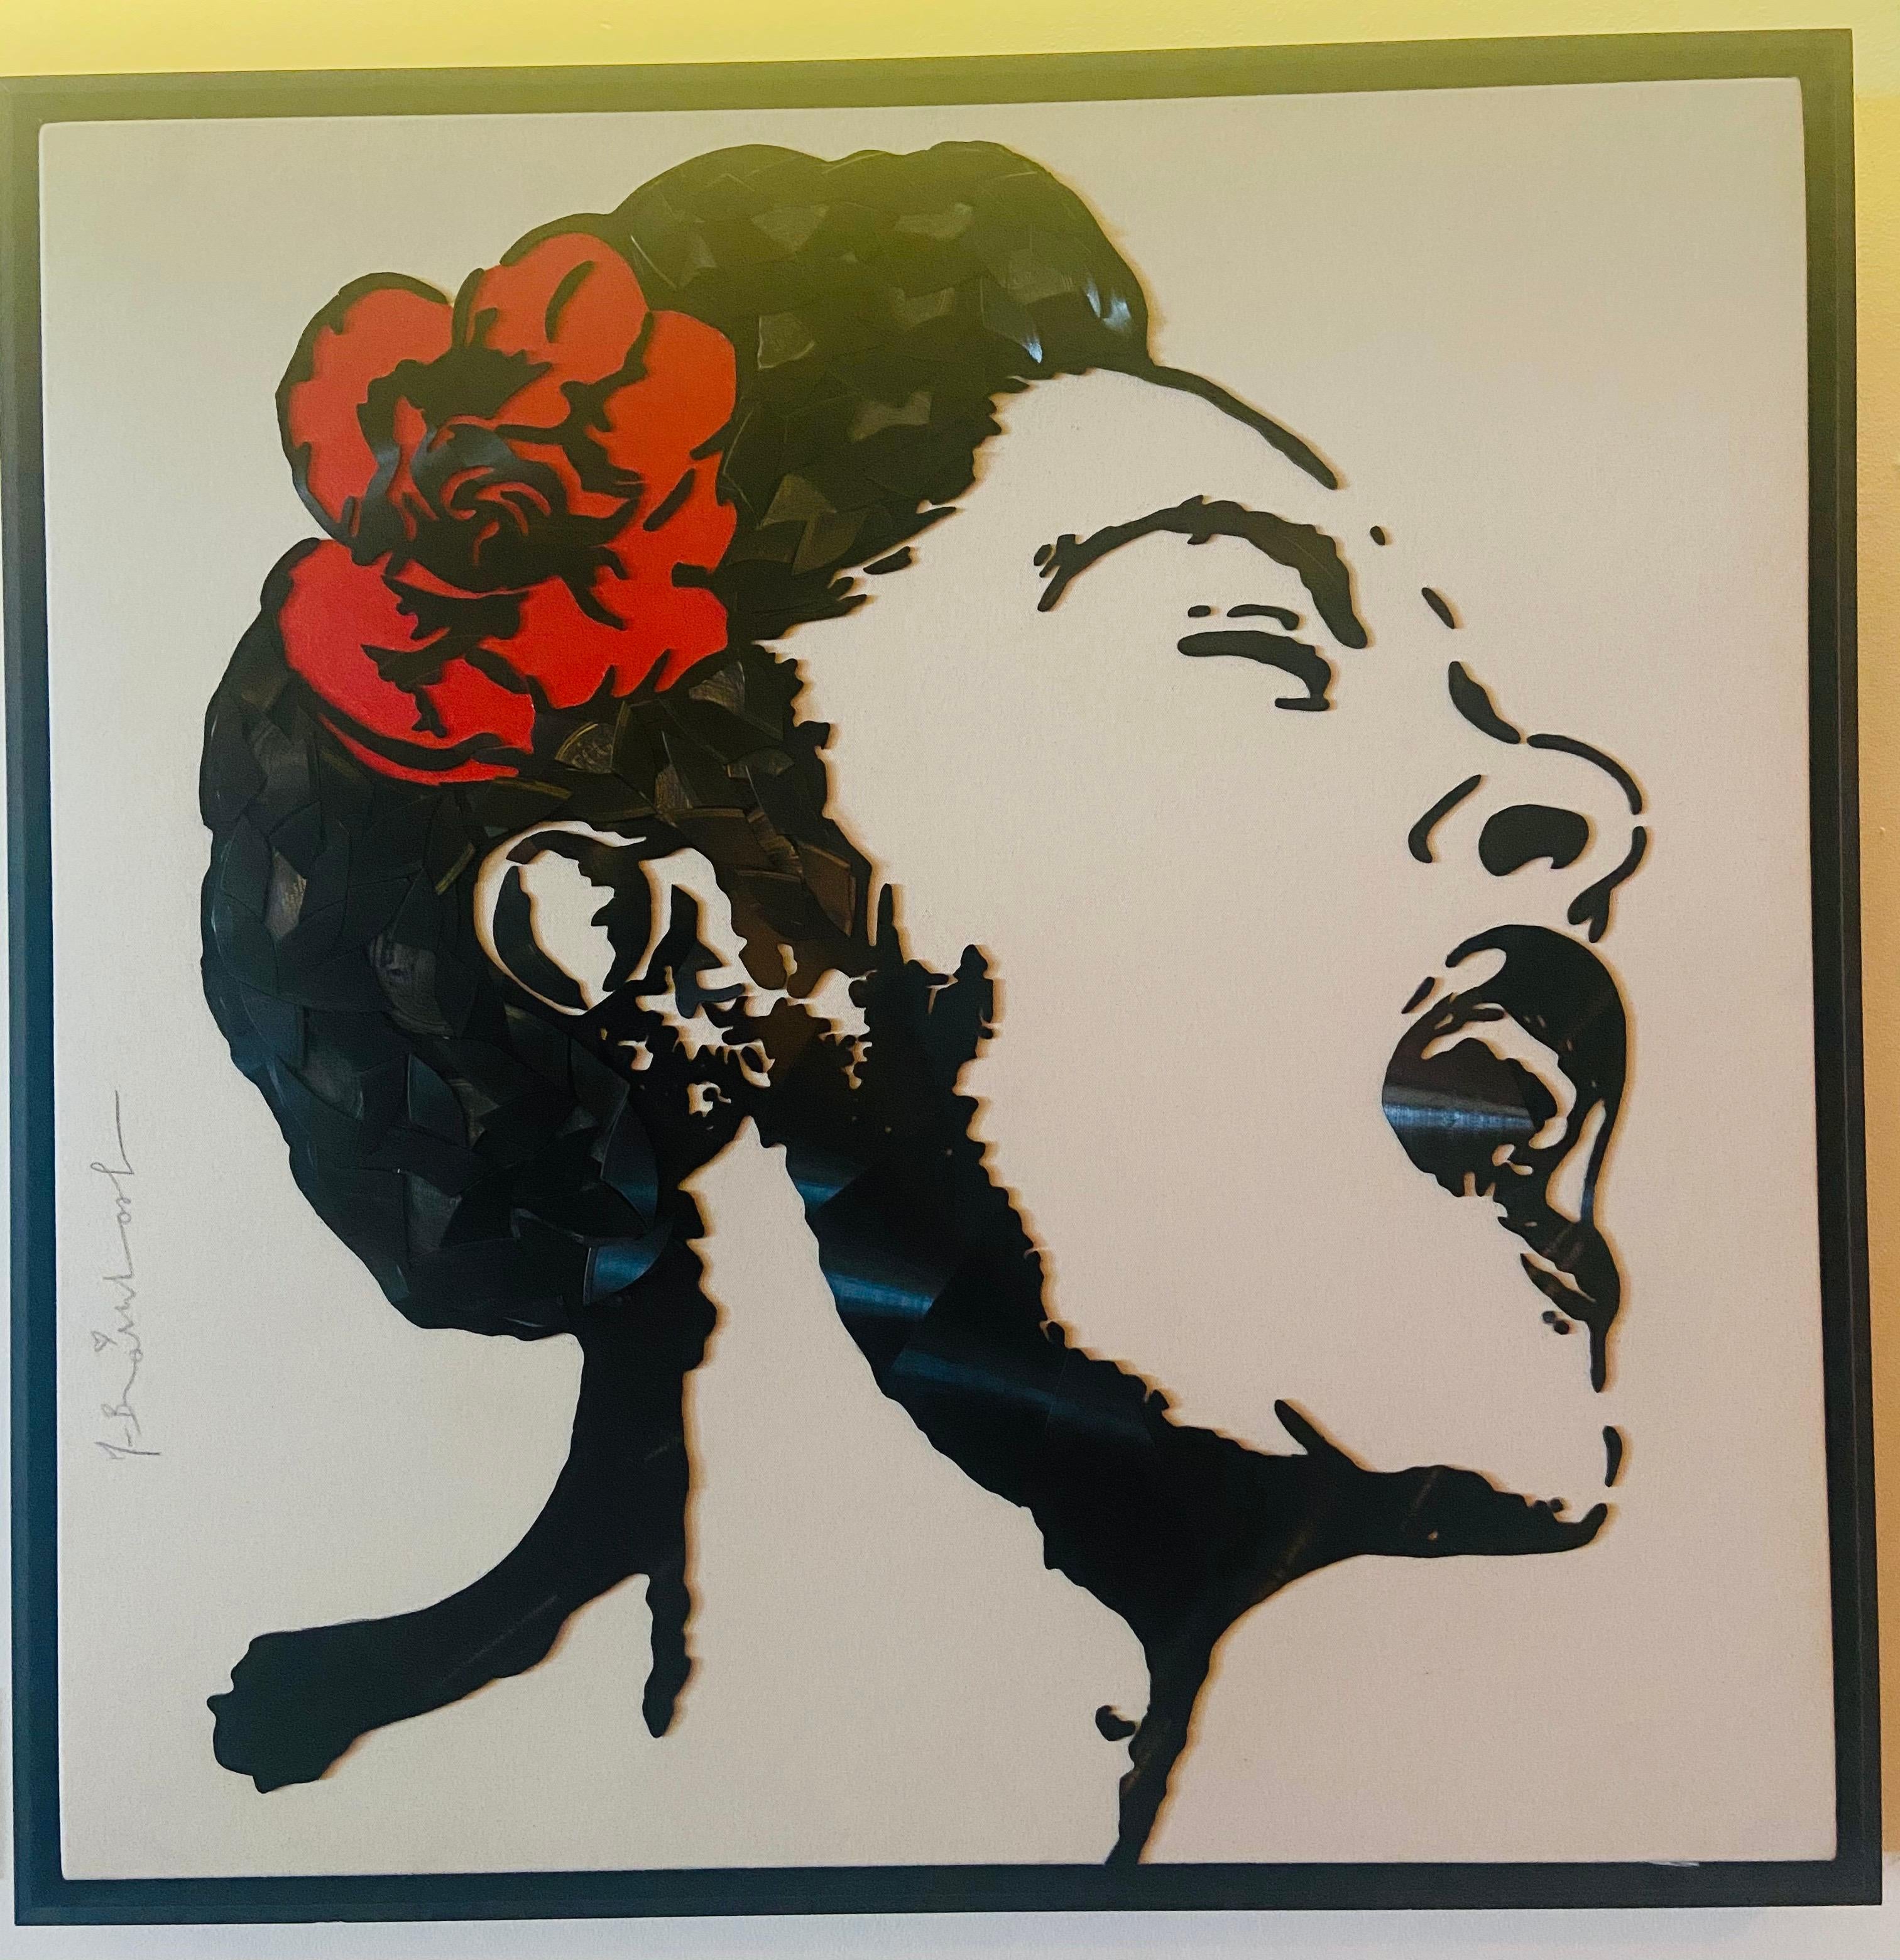 In this particular work composed by pieces of vinyl on canvas the artist represents Billie Holiday, the famous American singer of jazz and blues. The protagonist is surrounded by a white background, unusual for the artist, while she is singing. The